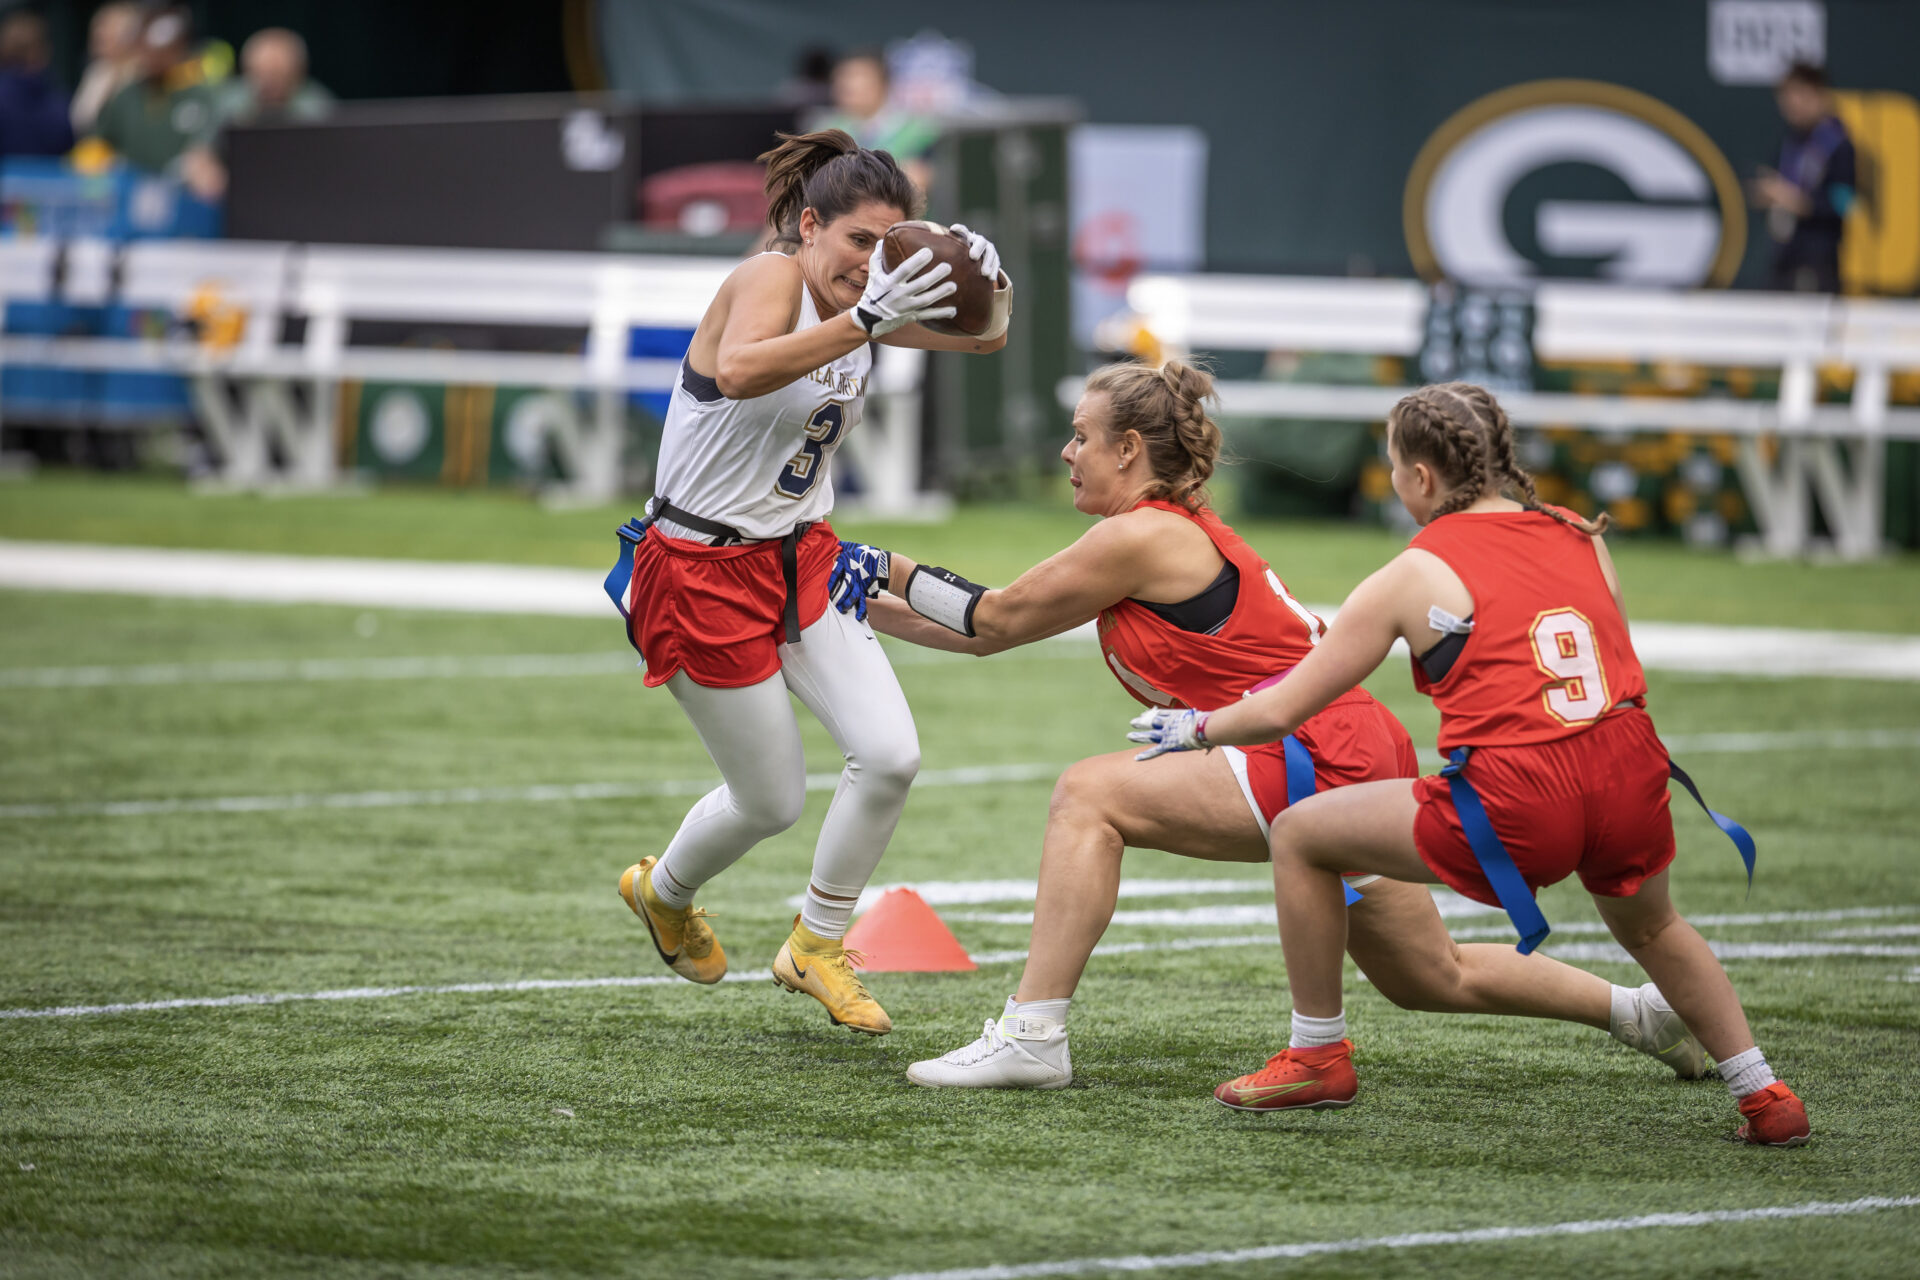 BAFA funding boost to develop next generation of Flag Football talent